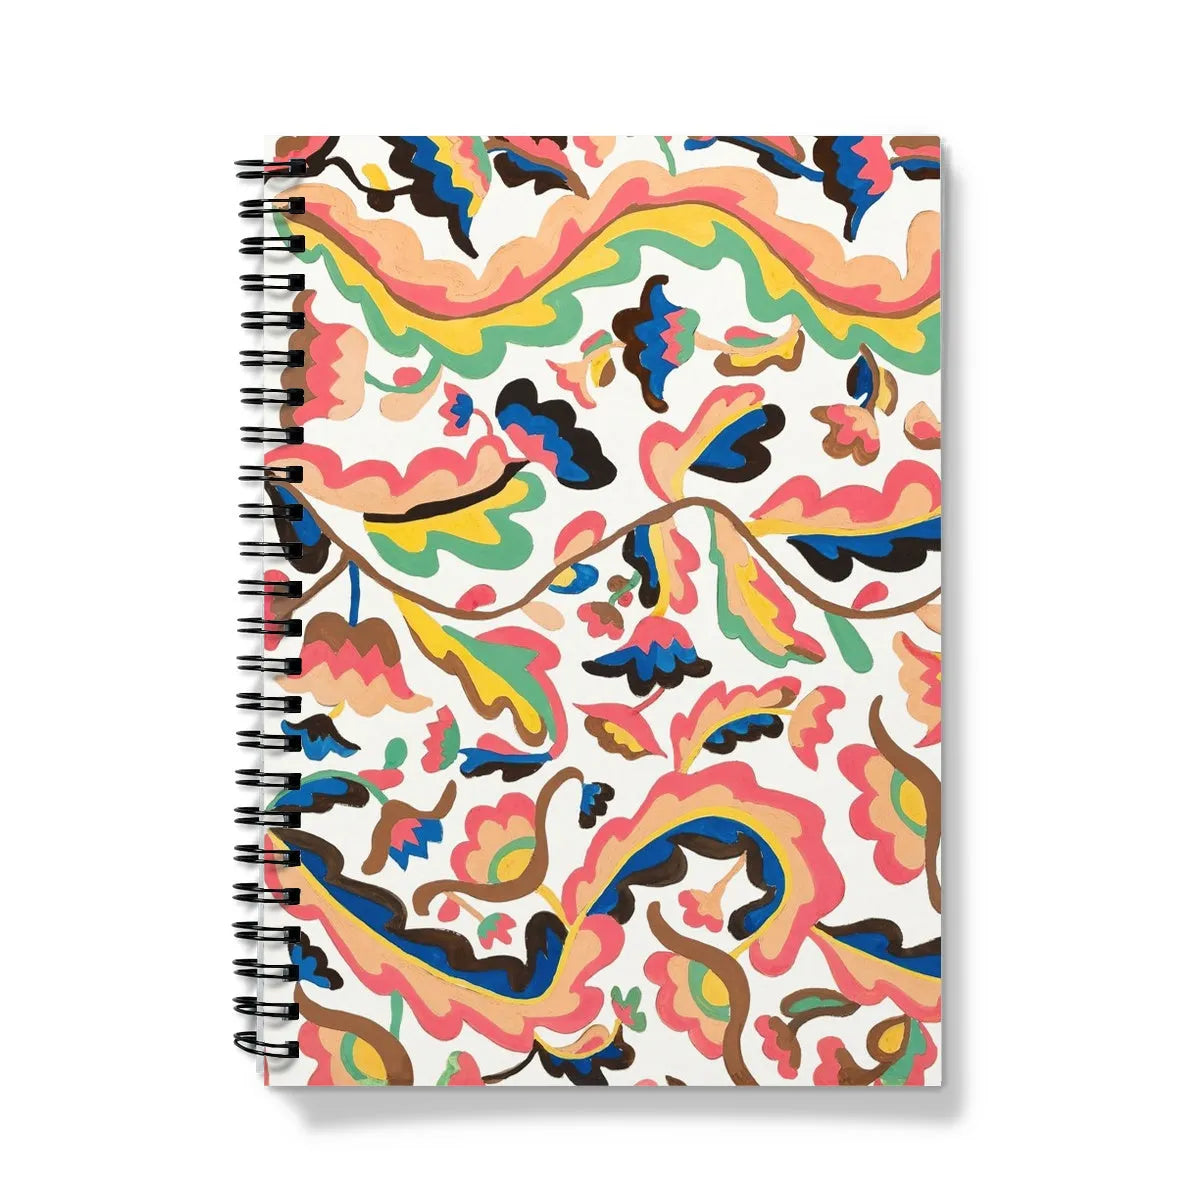 Colcha By Etna Wiswall Notebook - A5 / Graph - Notebooks & Notepads - Aesthetic Art